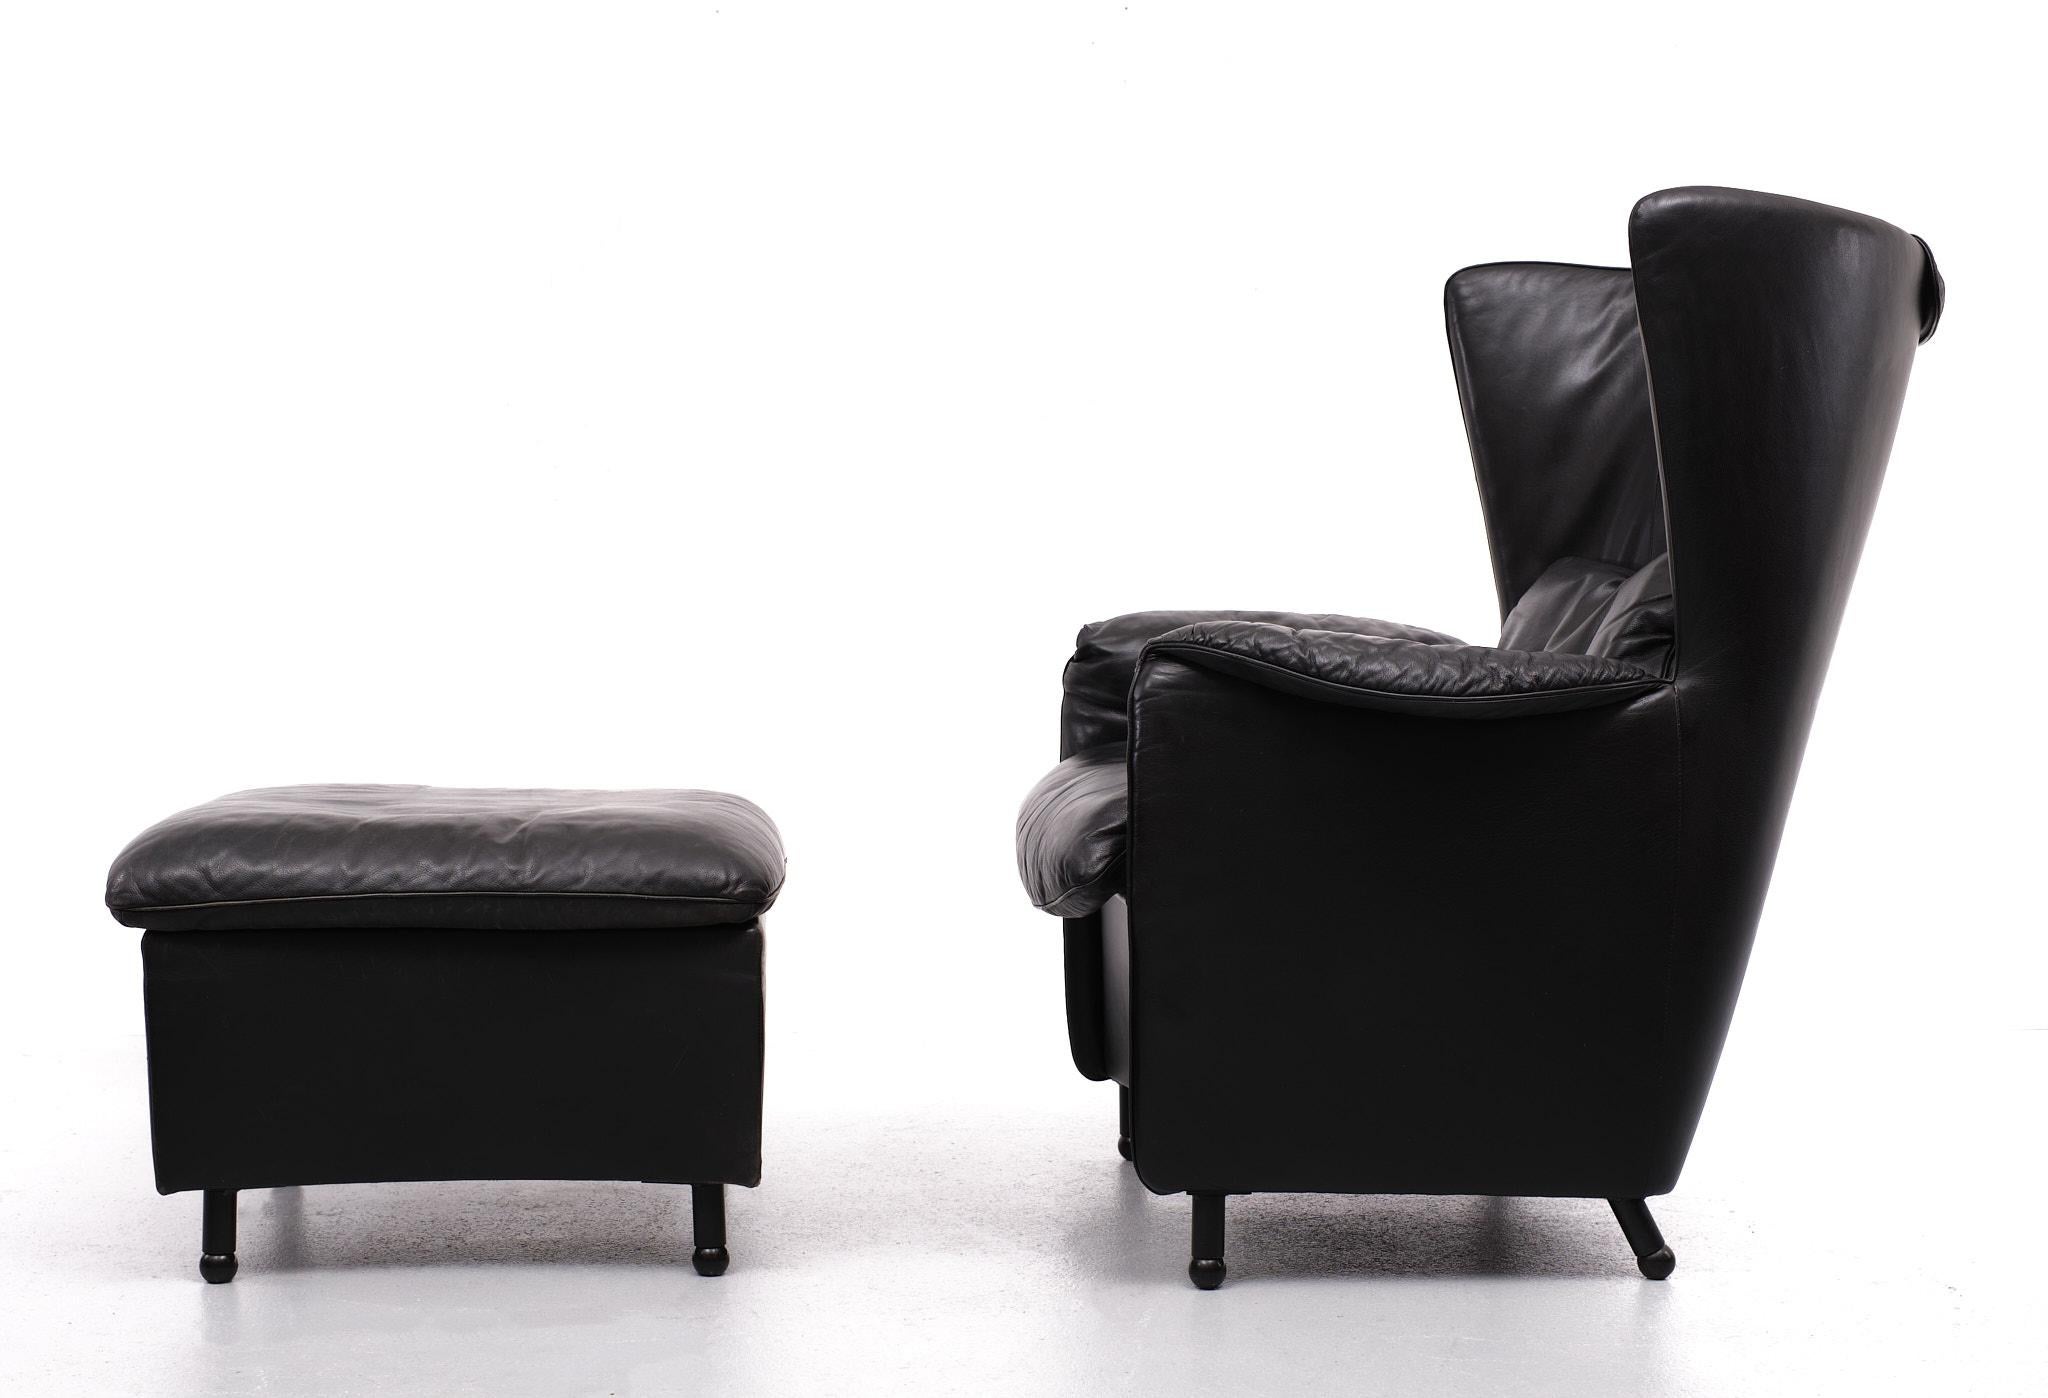 De Sede DS 23 Superb set. Lounge wing chair and a matching ottoman. Black smooth Alanine Leather comes complete with the neck cushion and lumbar cushion.
Made by the master furniture makers from Switzerland. 
Very good quality and seating comfort